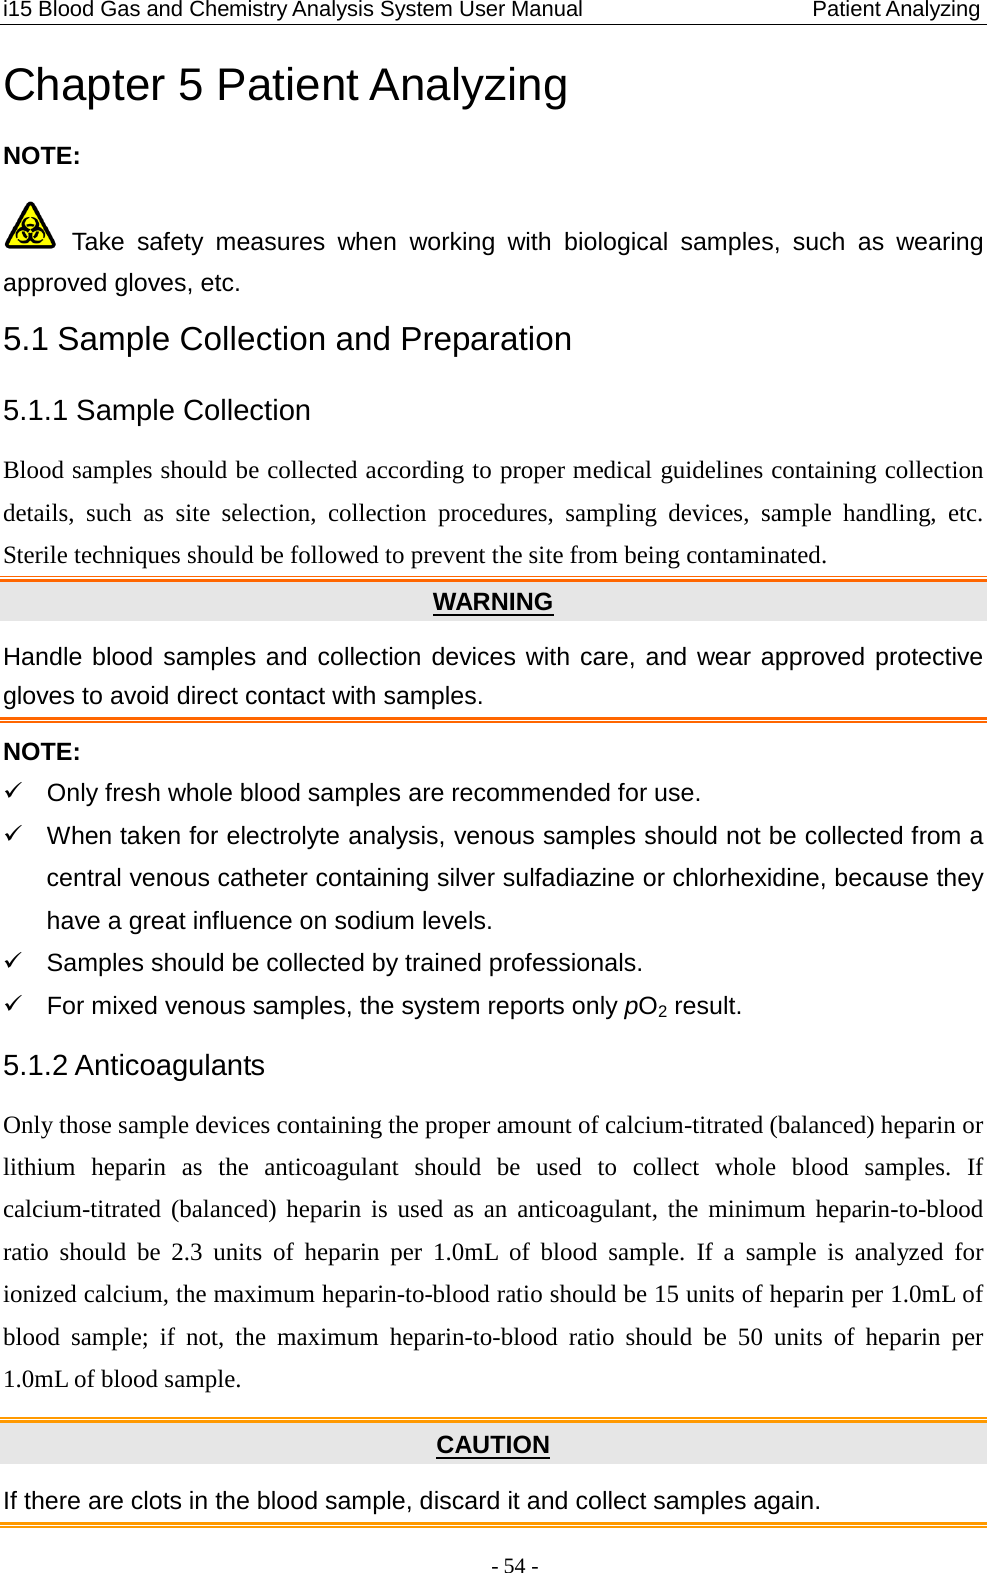 i15 Blood Gas and Chemistry Analysis System User Manual                            Patient Analyzing - 54 - Chapter 5 Patient Analyzing NOTE:  Take safety measures when working  with  biological samples, such as wearing approved gloves, etc. 5.1 Sample Collection and Preparation 5.1.1 Sample Collection Blood samples should be collected according to proper medical guidelines containing collection details, such as site selection, collection procedures, sampling devices, sample handling, etc. Sterile techniques should be followed to prevent the site from being contaminated. Handle blood samples and collection devices with care, and wear approved protective gloves to avoid direct contact with samples. WARNING NOTE:   Only fresh whole blood samples are recommended for use.   When taken for electrolyte analysis, venous samples should not be collected from a central venous catheter containing silver sulfadiazine or chlorhexidine, because they have a great influence on sodium levels.   Samples should be collected by trained professionals.  For mixed venous samples, the system reports only pO2 result. 5.1.2 Anticoagulants Only those sample devices containing the proper amount of calcium-titrated (balanced) heparin or lithium heparin as the anticoagulant should be used to collect whole blood samples.  If calcium-titrated (balanced) heparin is used as an anticoagulant, the minimum heparin-to-blood ratio should be 2.3 units of heparin per  1.0mL  of  blood  sample.  If  a  sample is analyzed for ionized calcium, the maximum heparin-to-blood ratio should be 15 units of heparin per 1.0mL of blood  sample; if not, the  maximum  heparin-to-blood ratio should  be  50  units  of heparin per 1.0mL of blood sample. If there are clots in the blood sample, discard it and collect samples again. CAUTION 